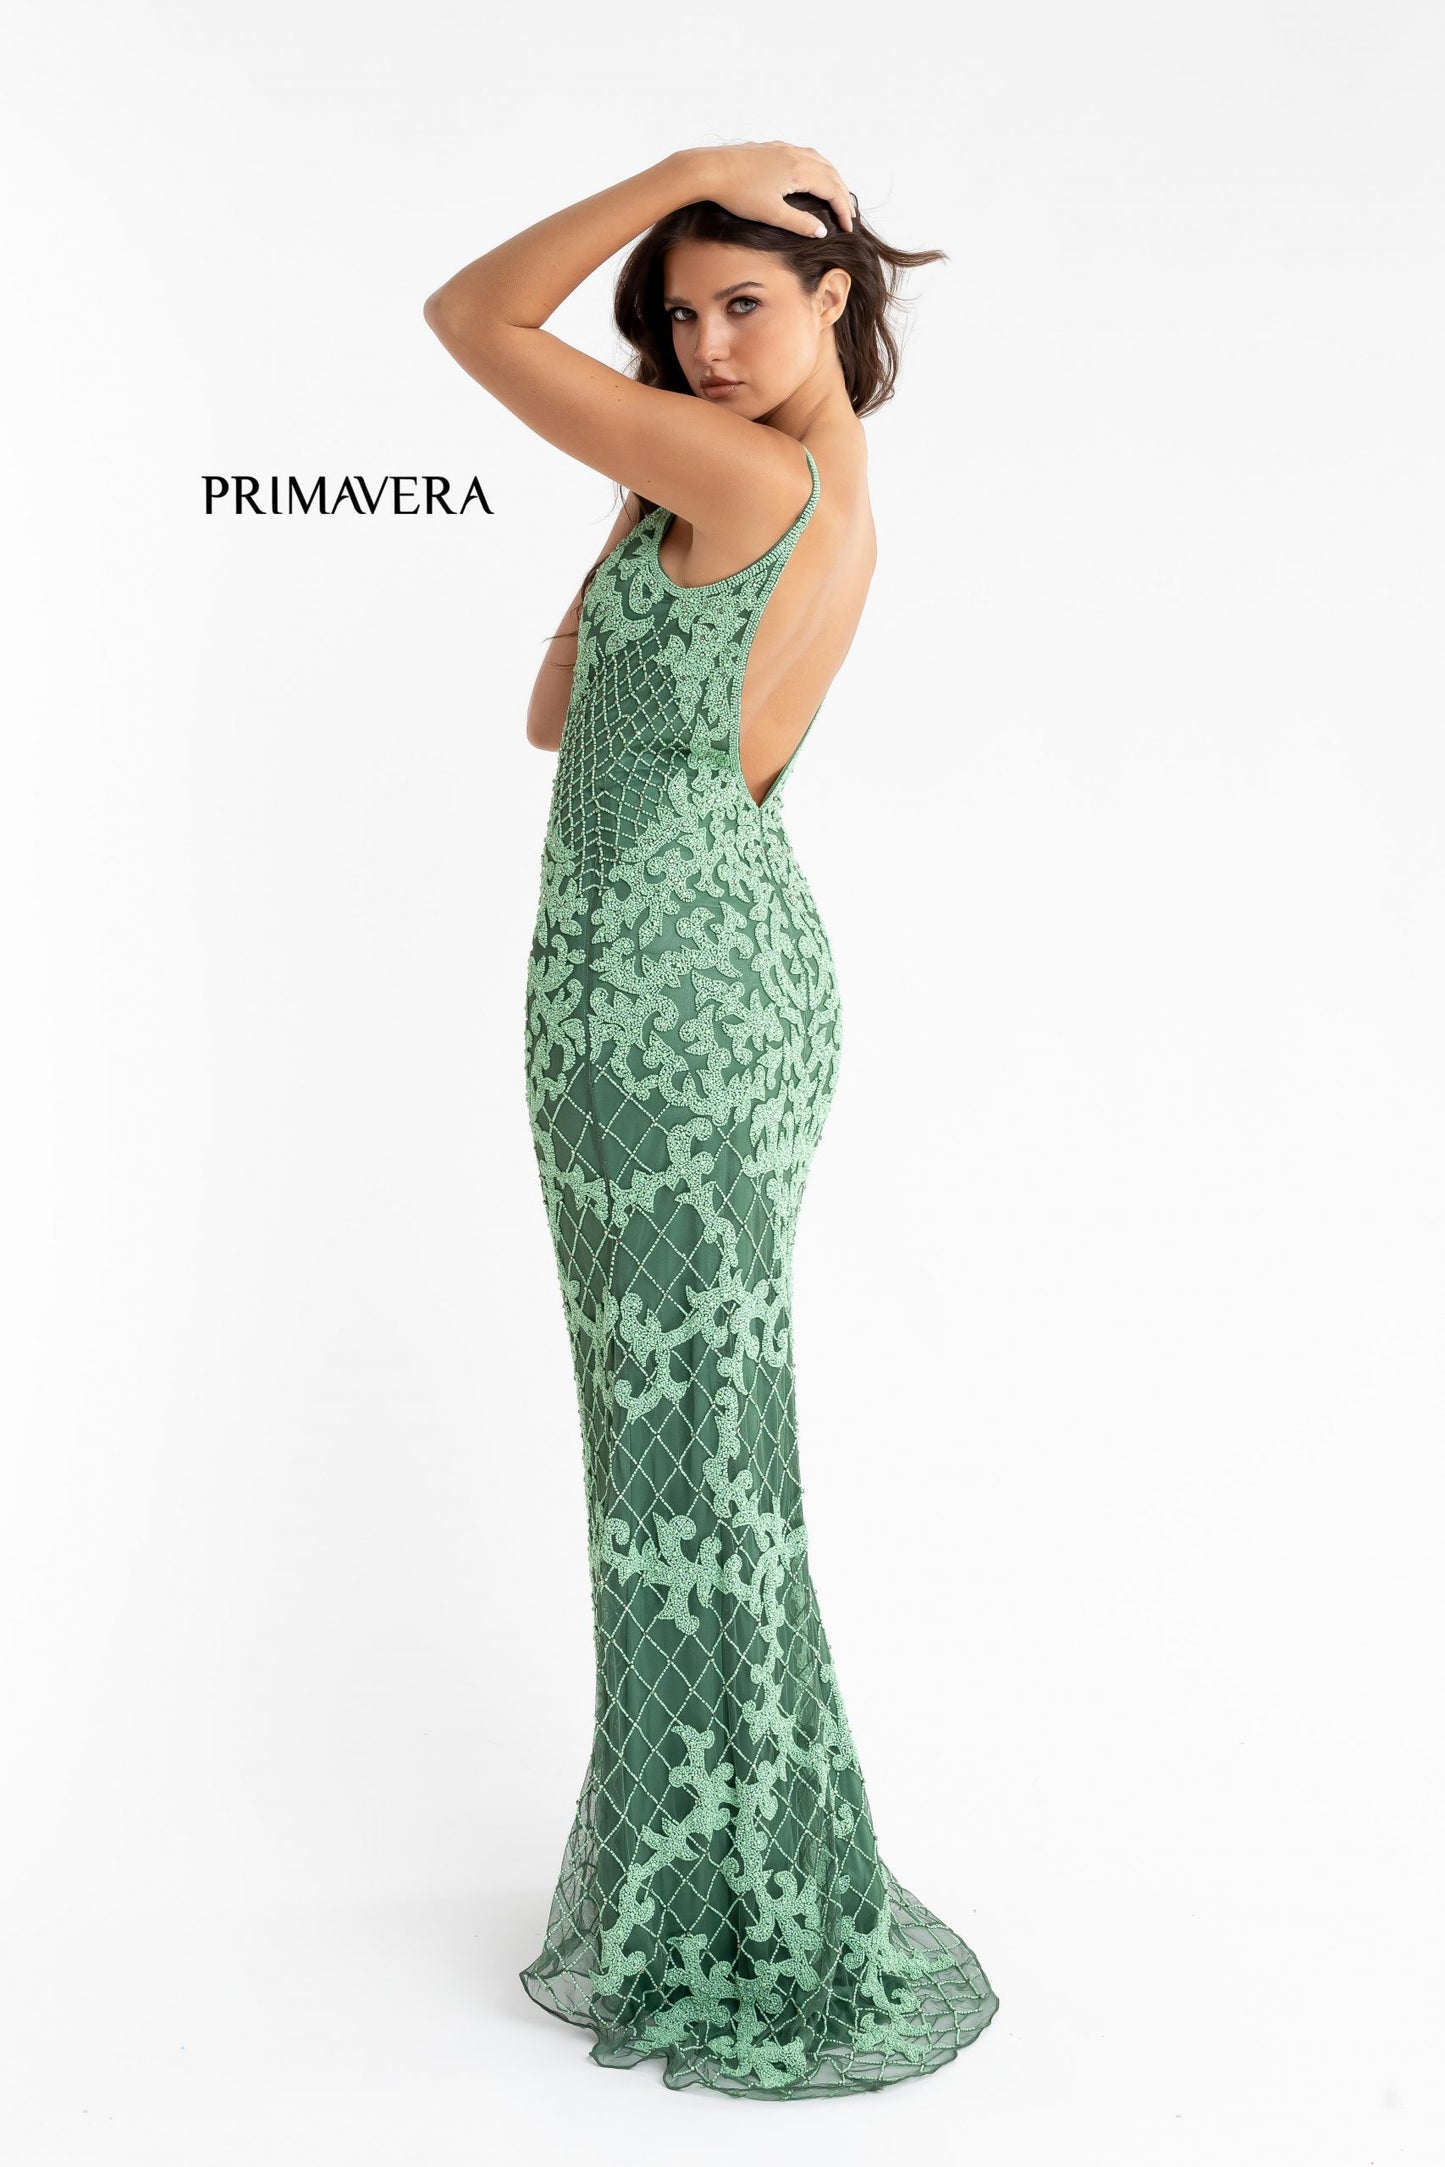 Primavera Couture 3433 is a long fully hand beaded Prom Dress, Pageant Gown, Wedding Dress & Formal Evening Wear gown. The Prom Dress has a plunging neckline with mesh panel and a long fully beaded, embellished straight skirt. It is perfect for a pageant gown or evening dress. 